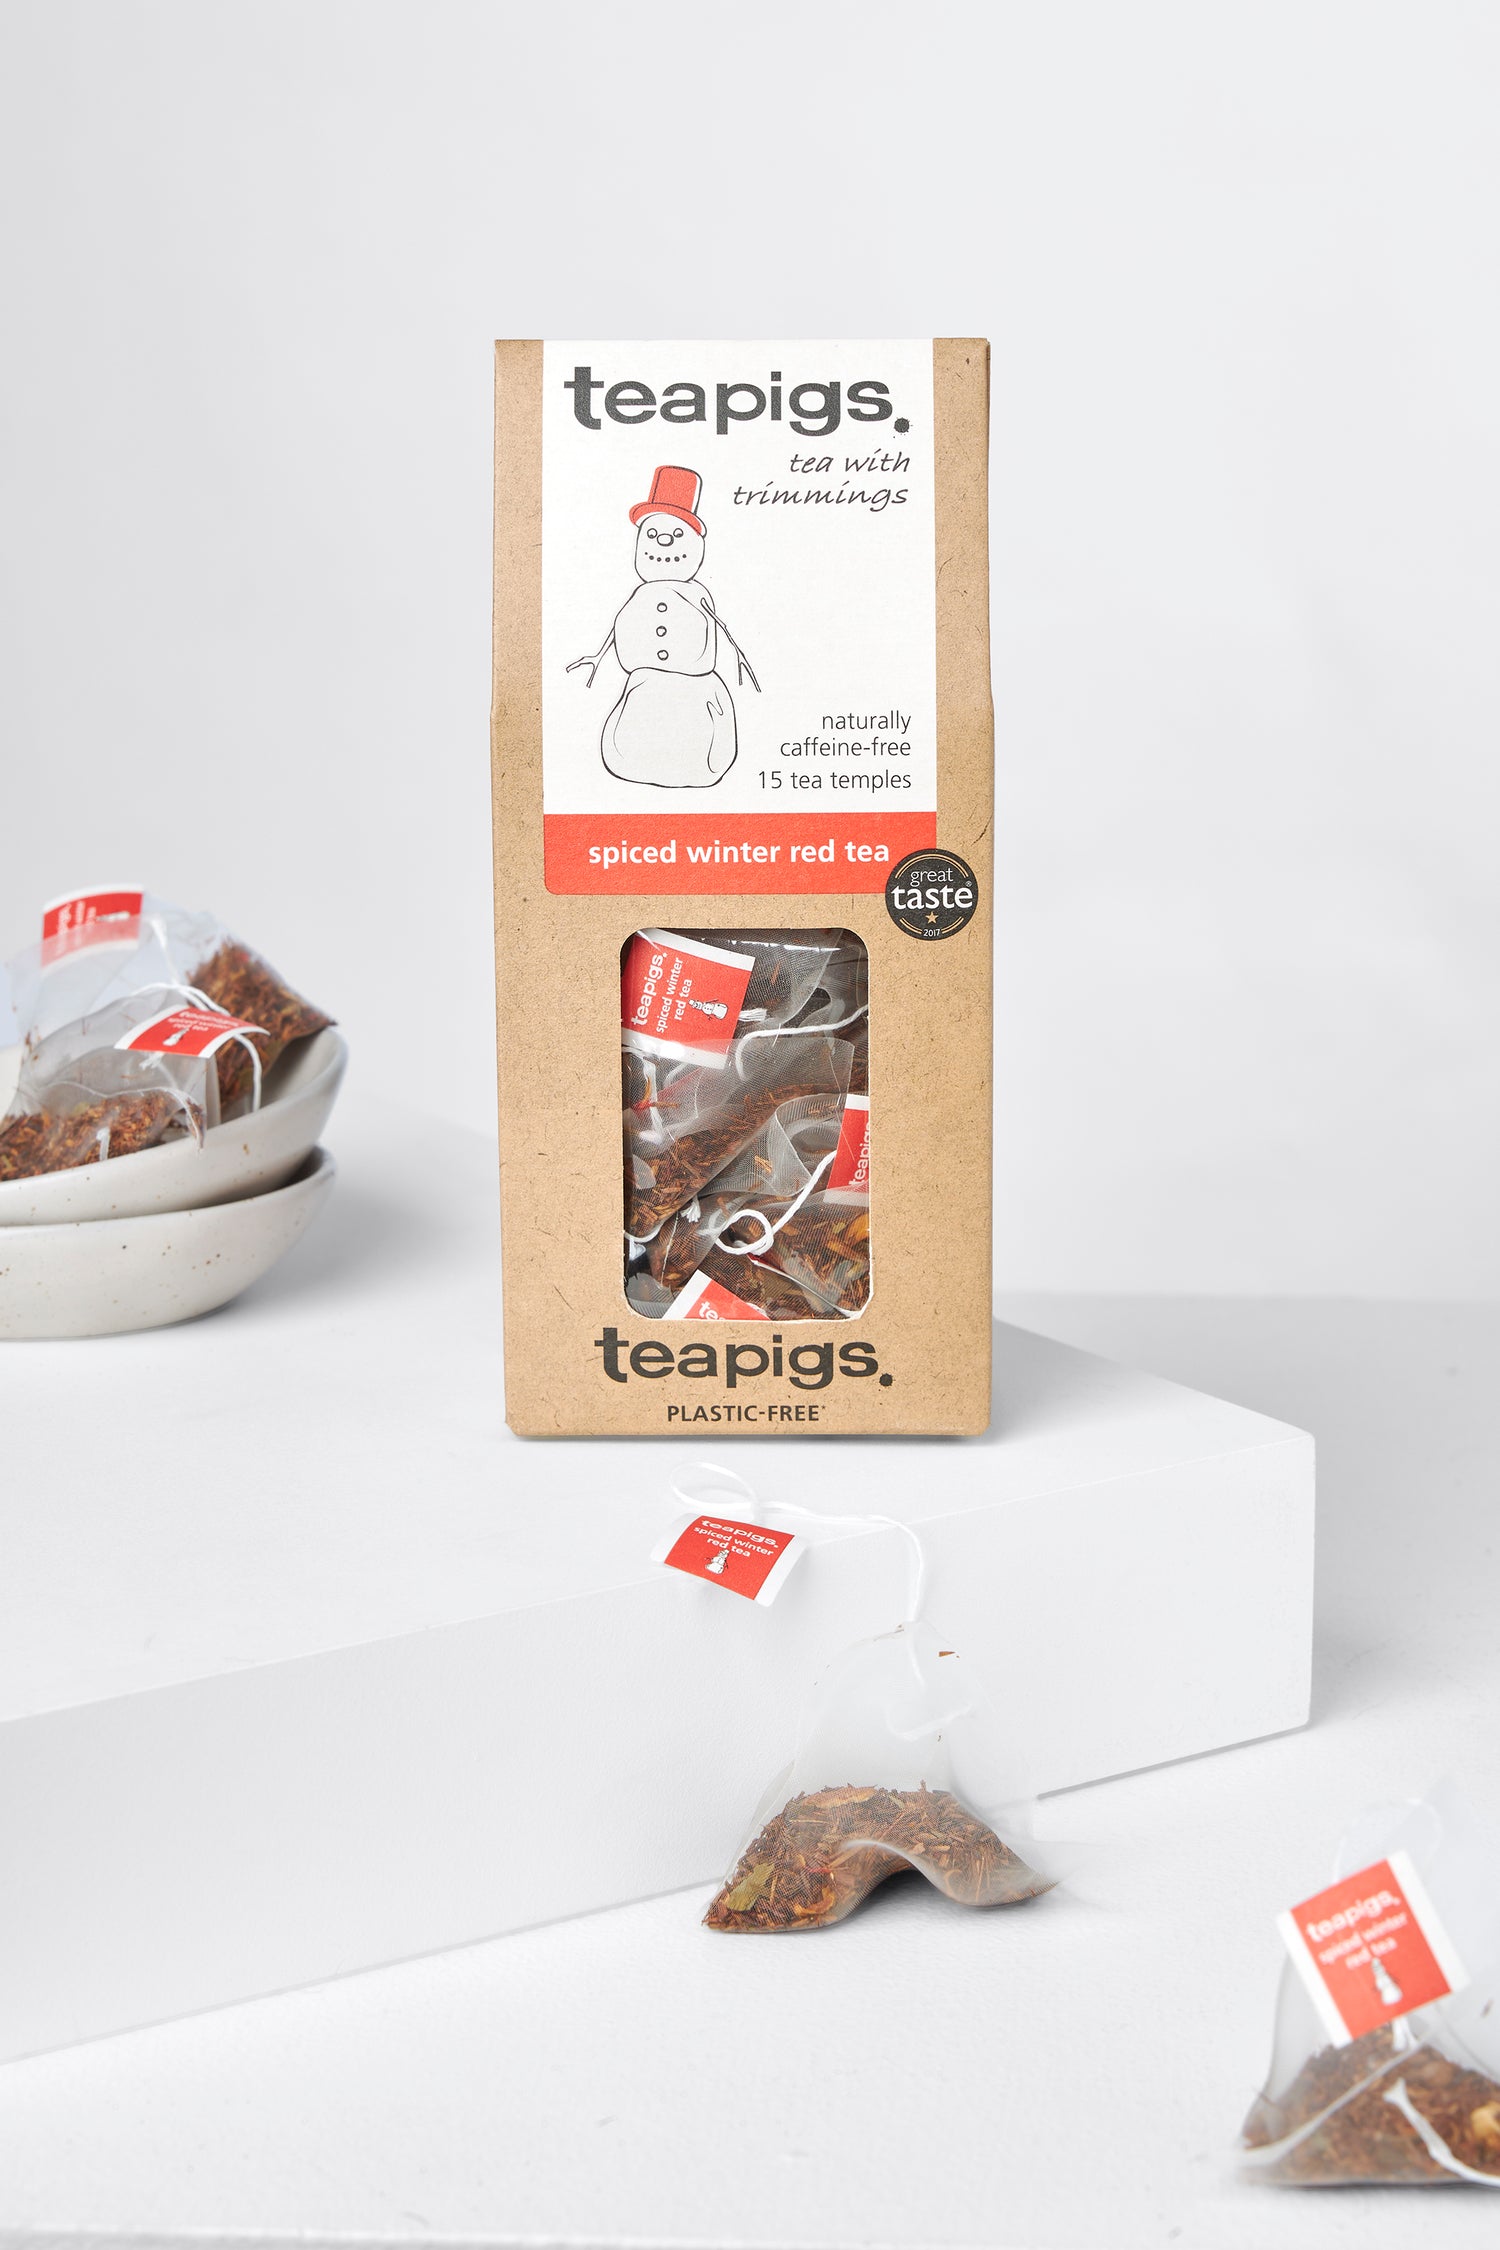 Sspiced winter red tea bags